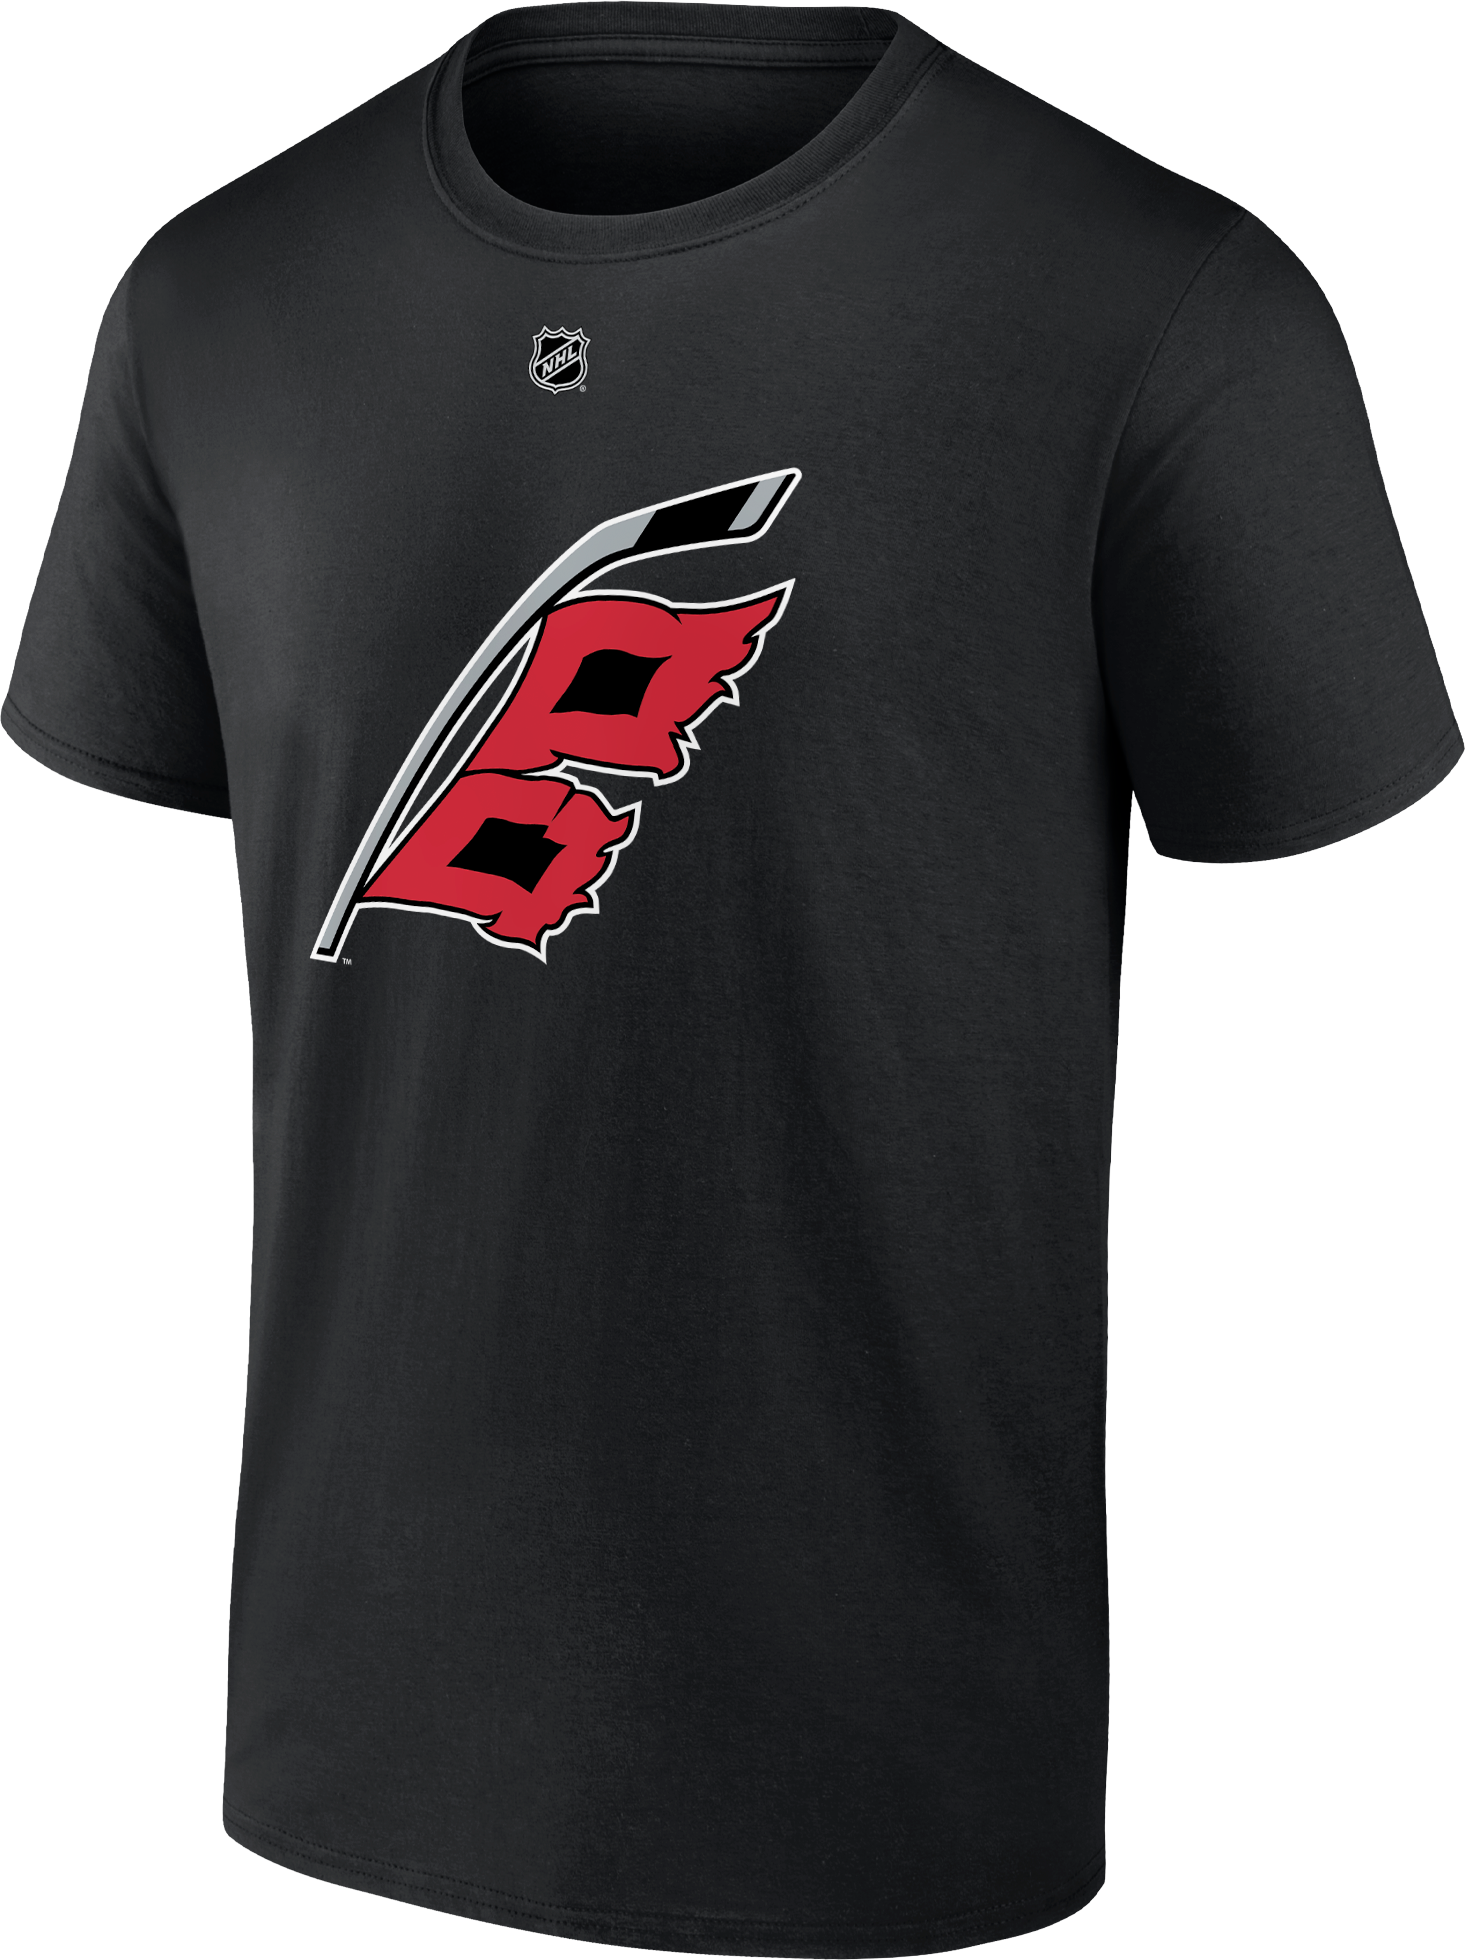 Front: Black tee with Flag logo and NHL shield above flag